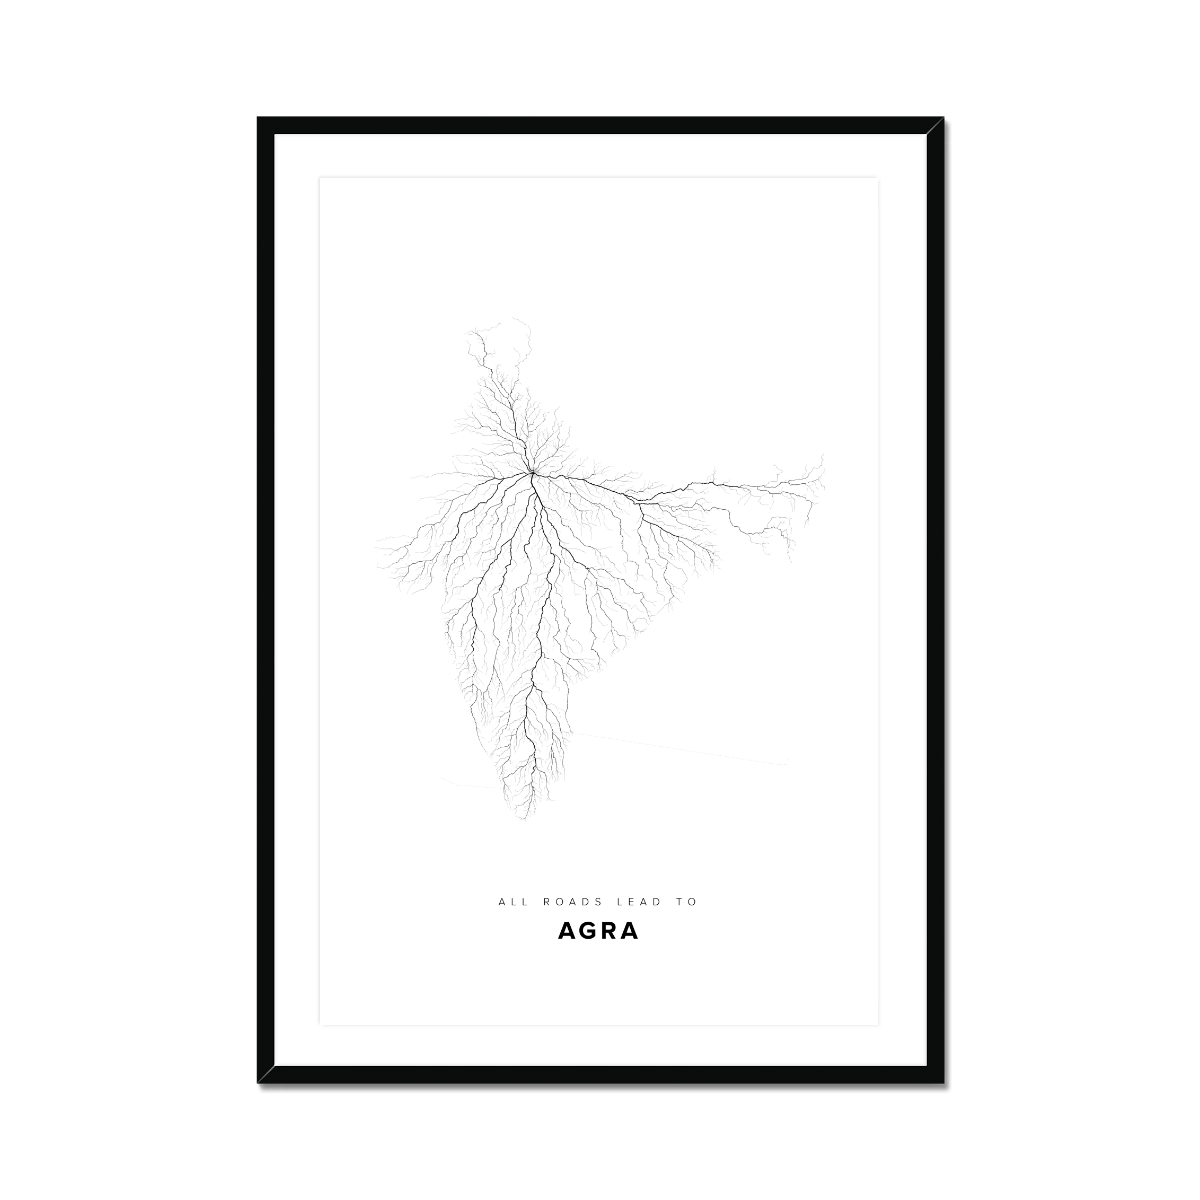 All roads lead to Agra (India) Fine Art Map Print